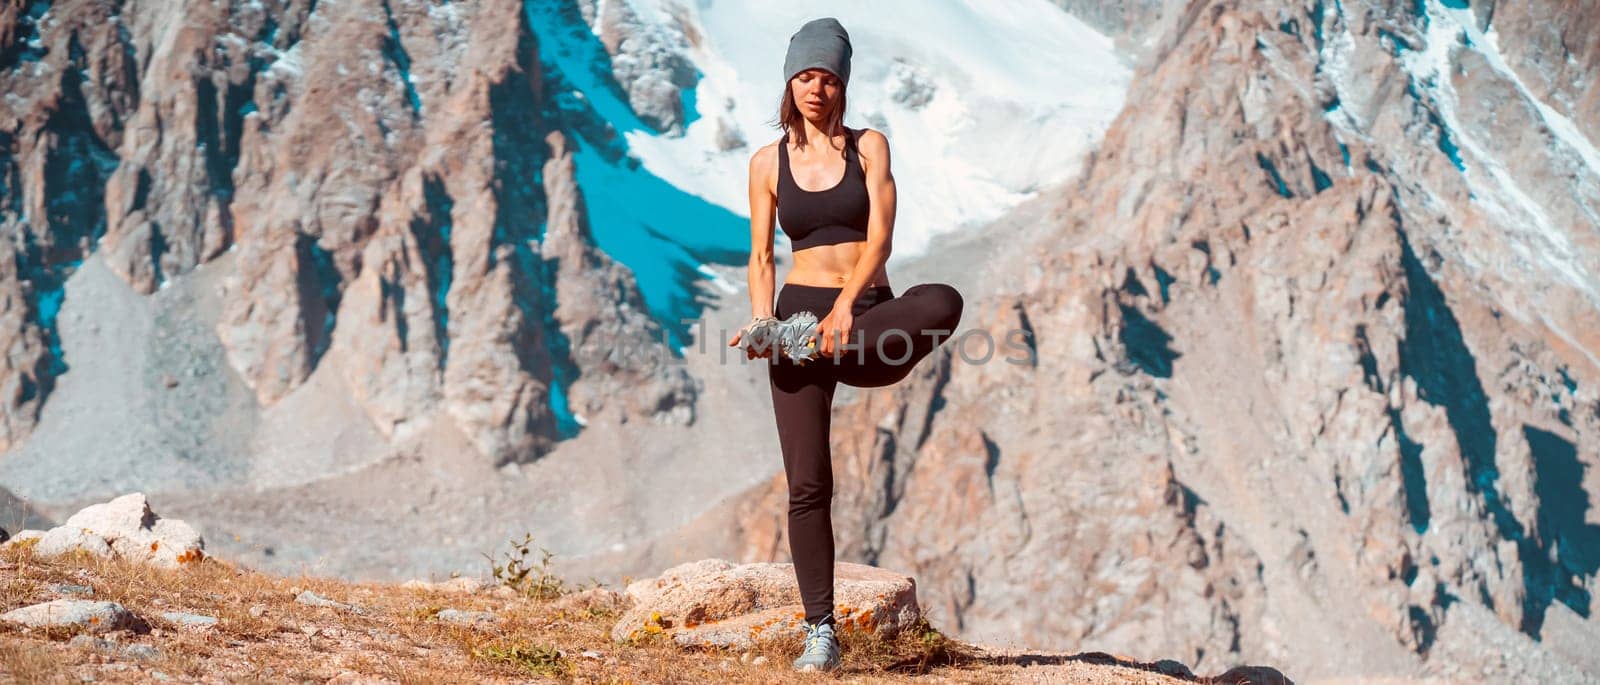 A young sports girl practices yoga on a background of snow-capped mountains on a sunny day, a woman does exercises, trains and meditates in a picturesque mountainous area.